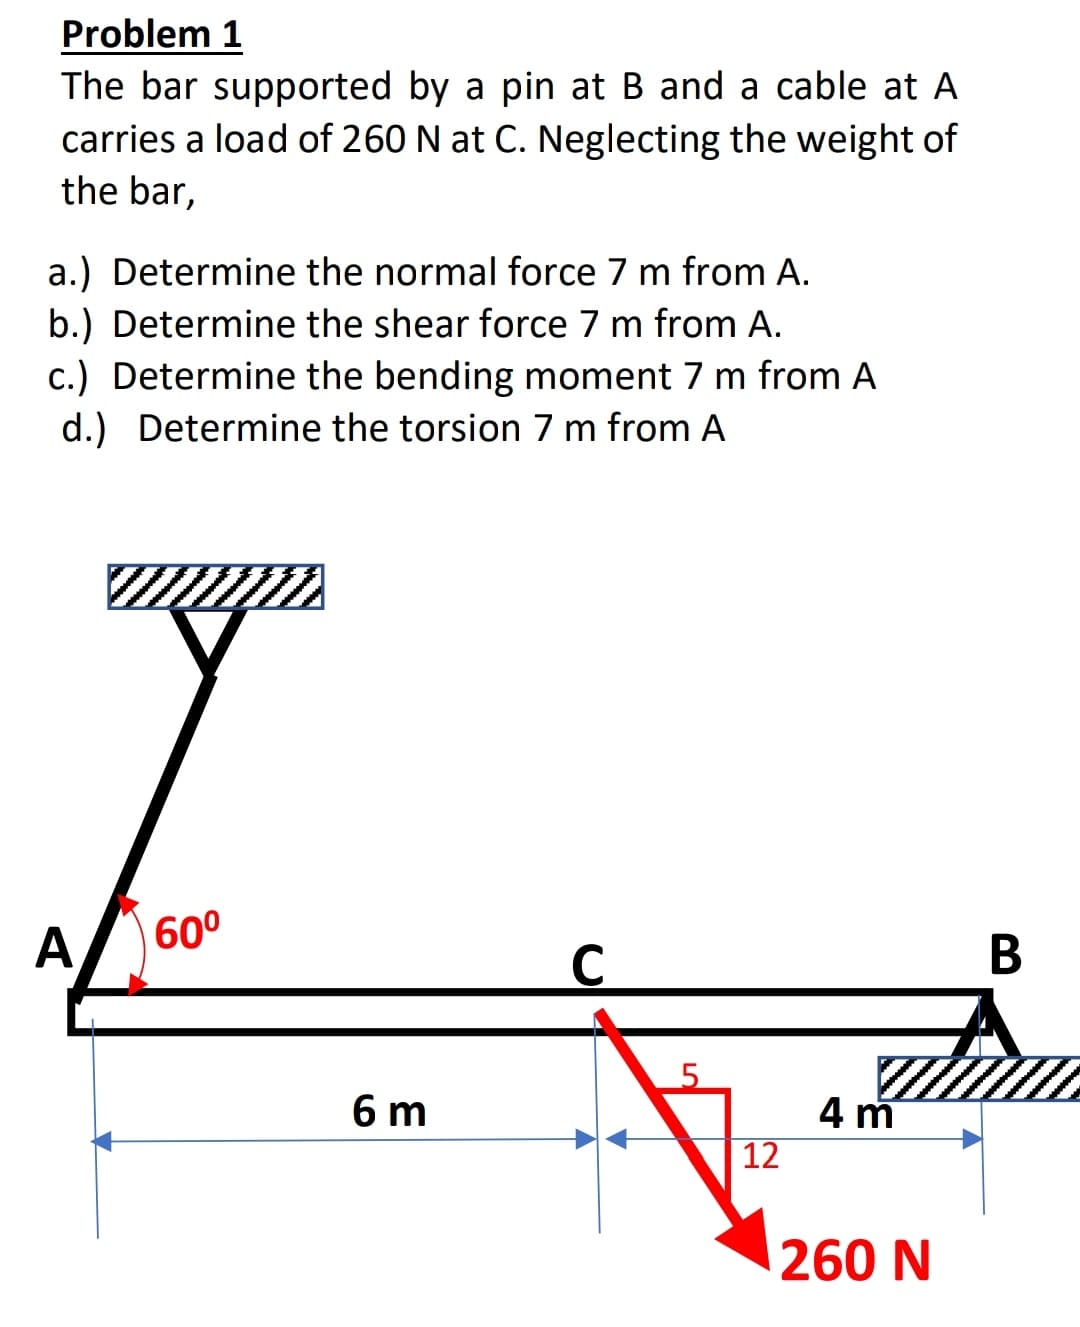 Problem 1
The bar supported by a pin at B and a cable at A
carries a load of 260 N at C. Neglecting the weight of
the bar,
a.) Determine the normal force 7 m from A.
b.) Determine the shear force 7 m from A.
c.) Determine the bending moment 7 m from A
d.) Determine the torsion 7 m from A
A
60°
В
5.
6 m
4 m
12
260 N
